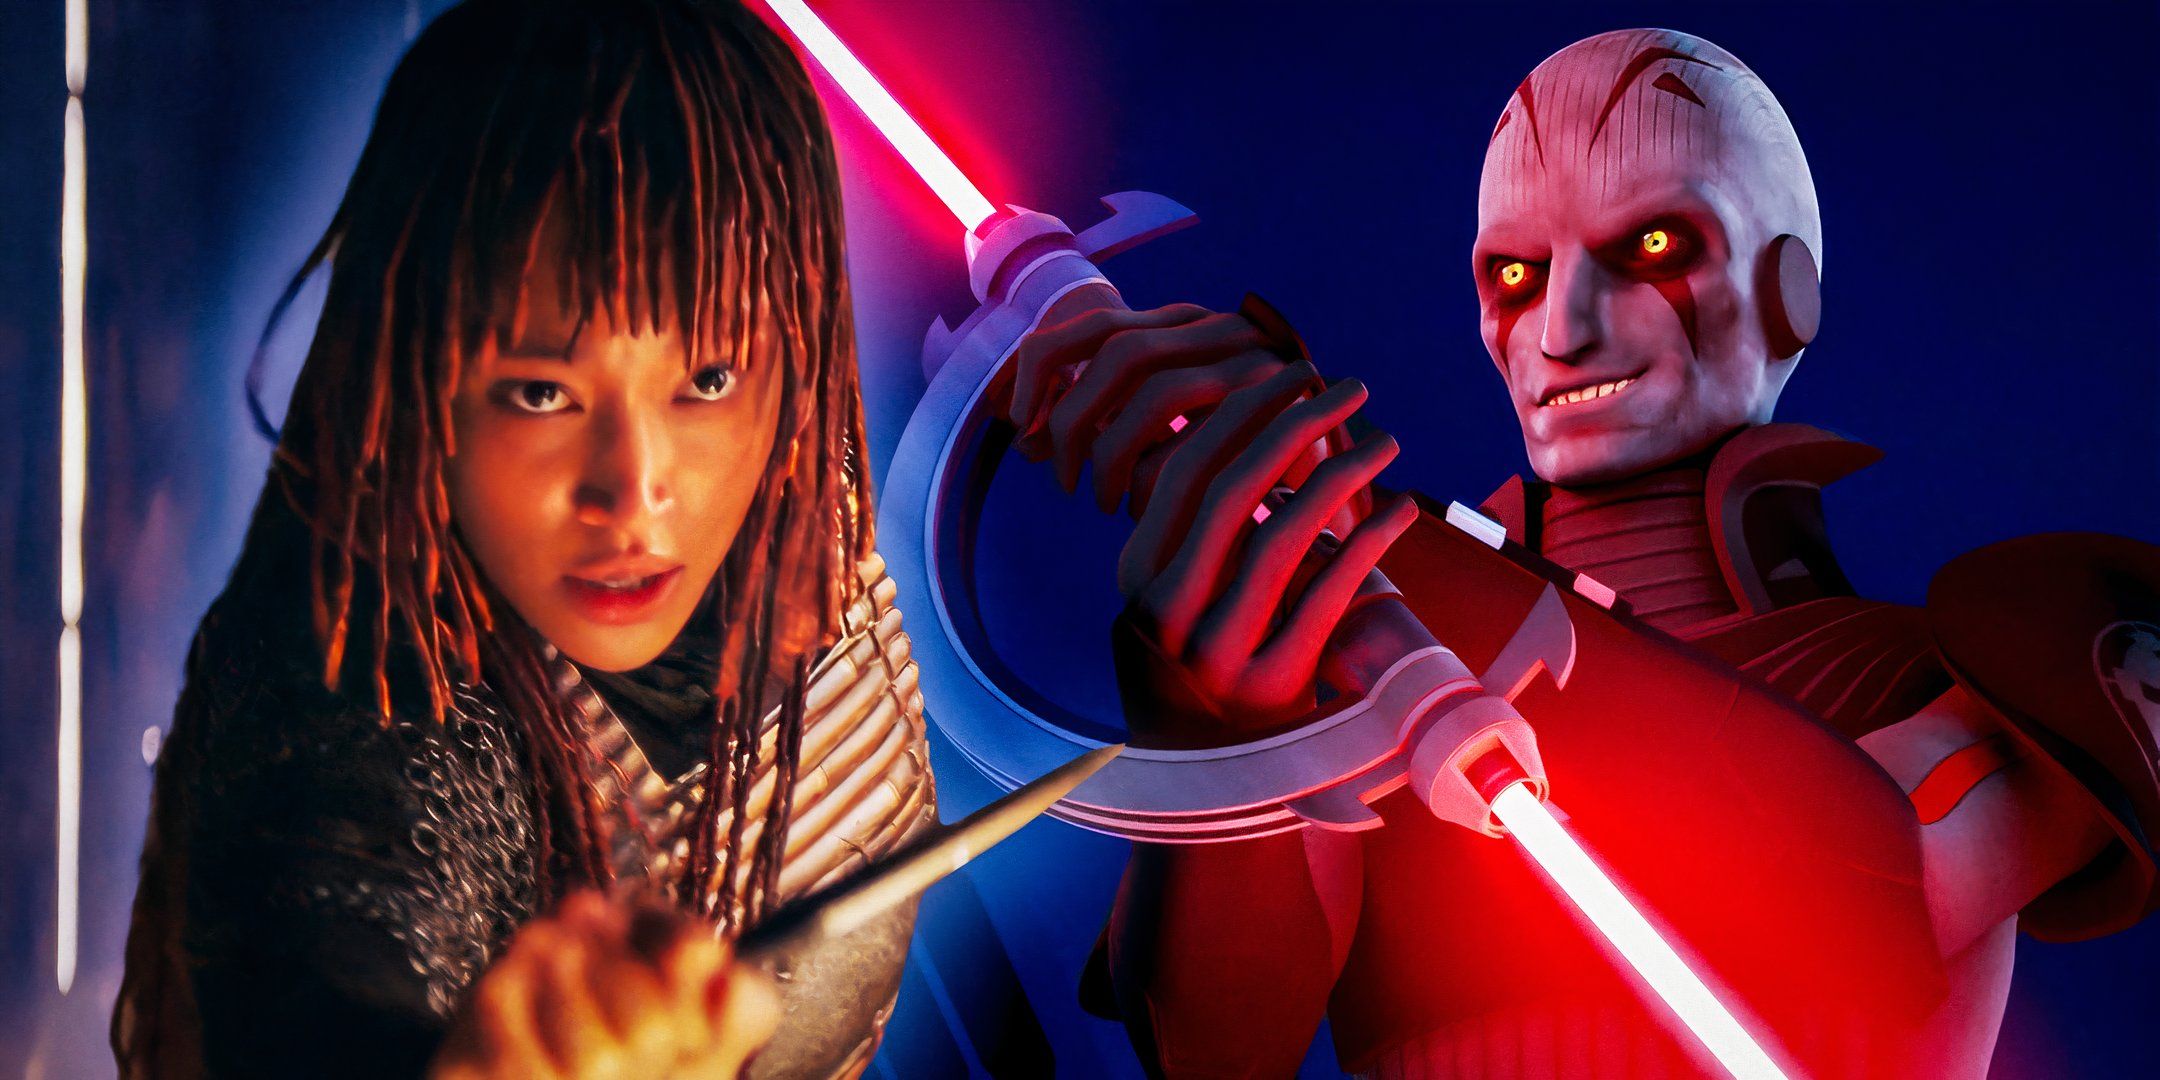 Amandla Stenbeg's Mae holds her dagger, and the Grand Inquisitor wields his lightsaber, edited together